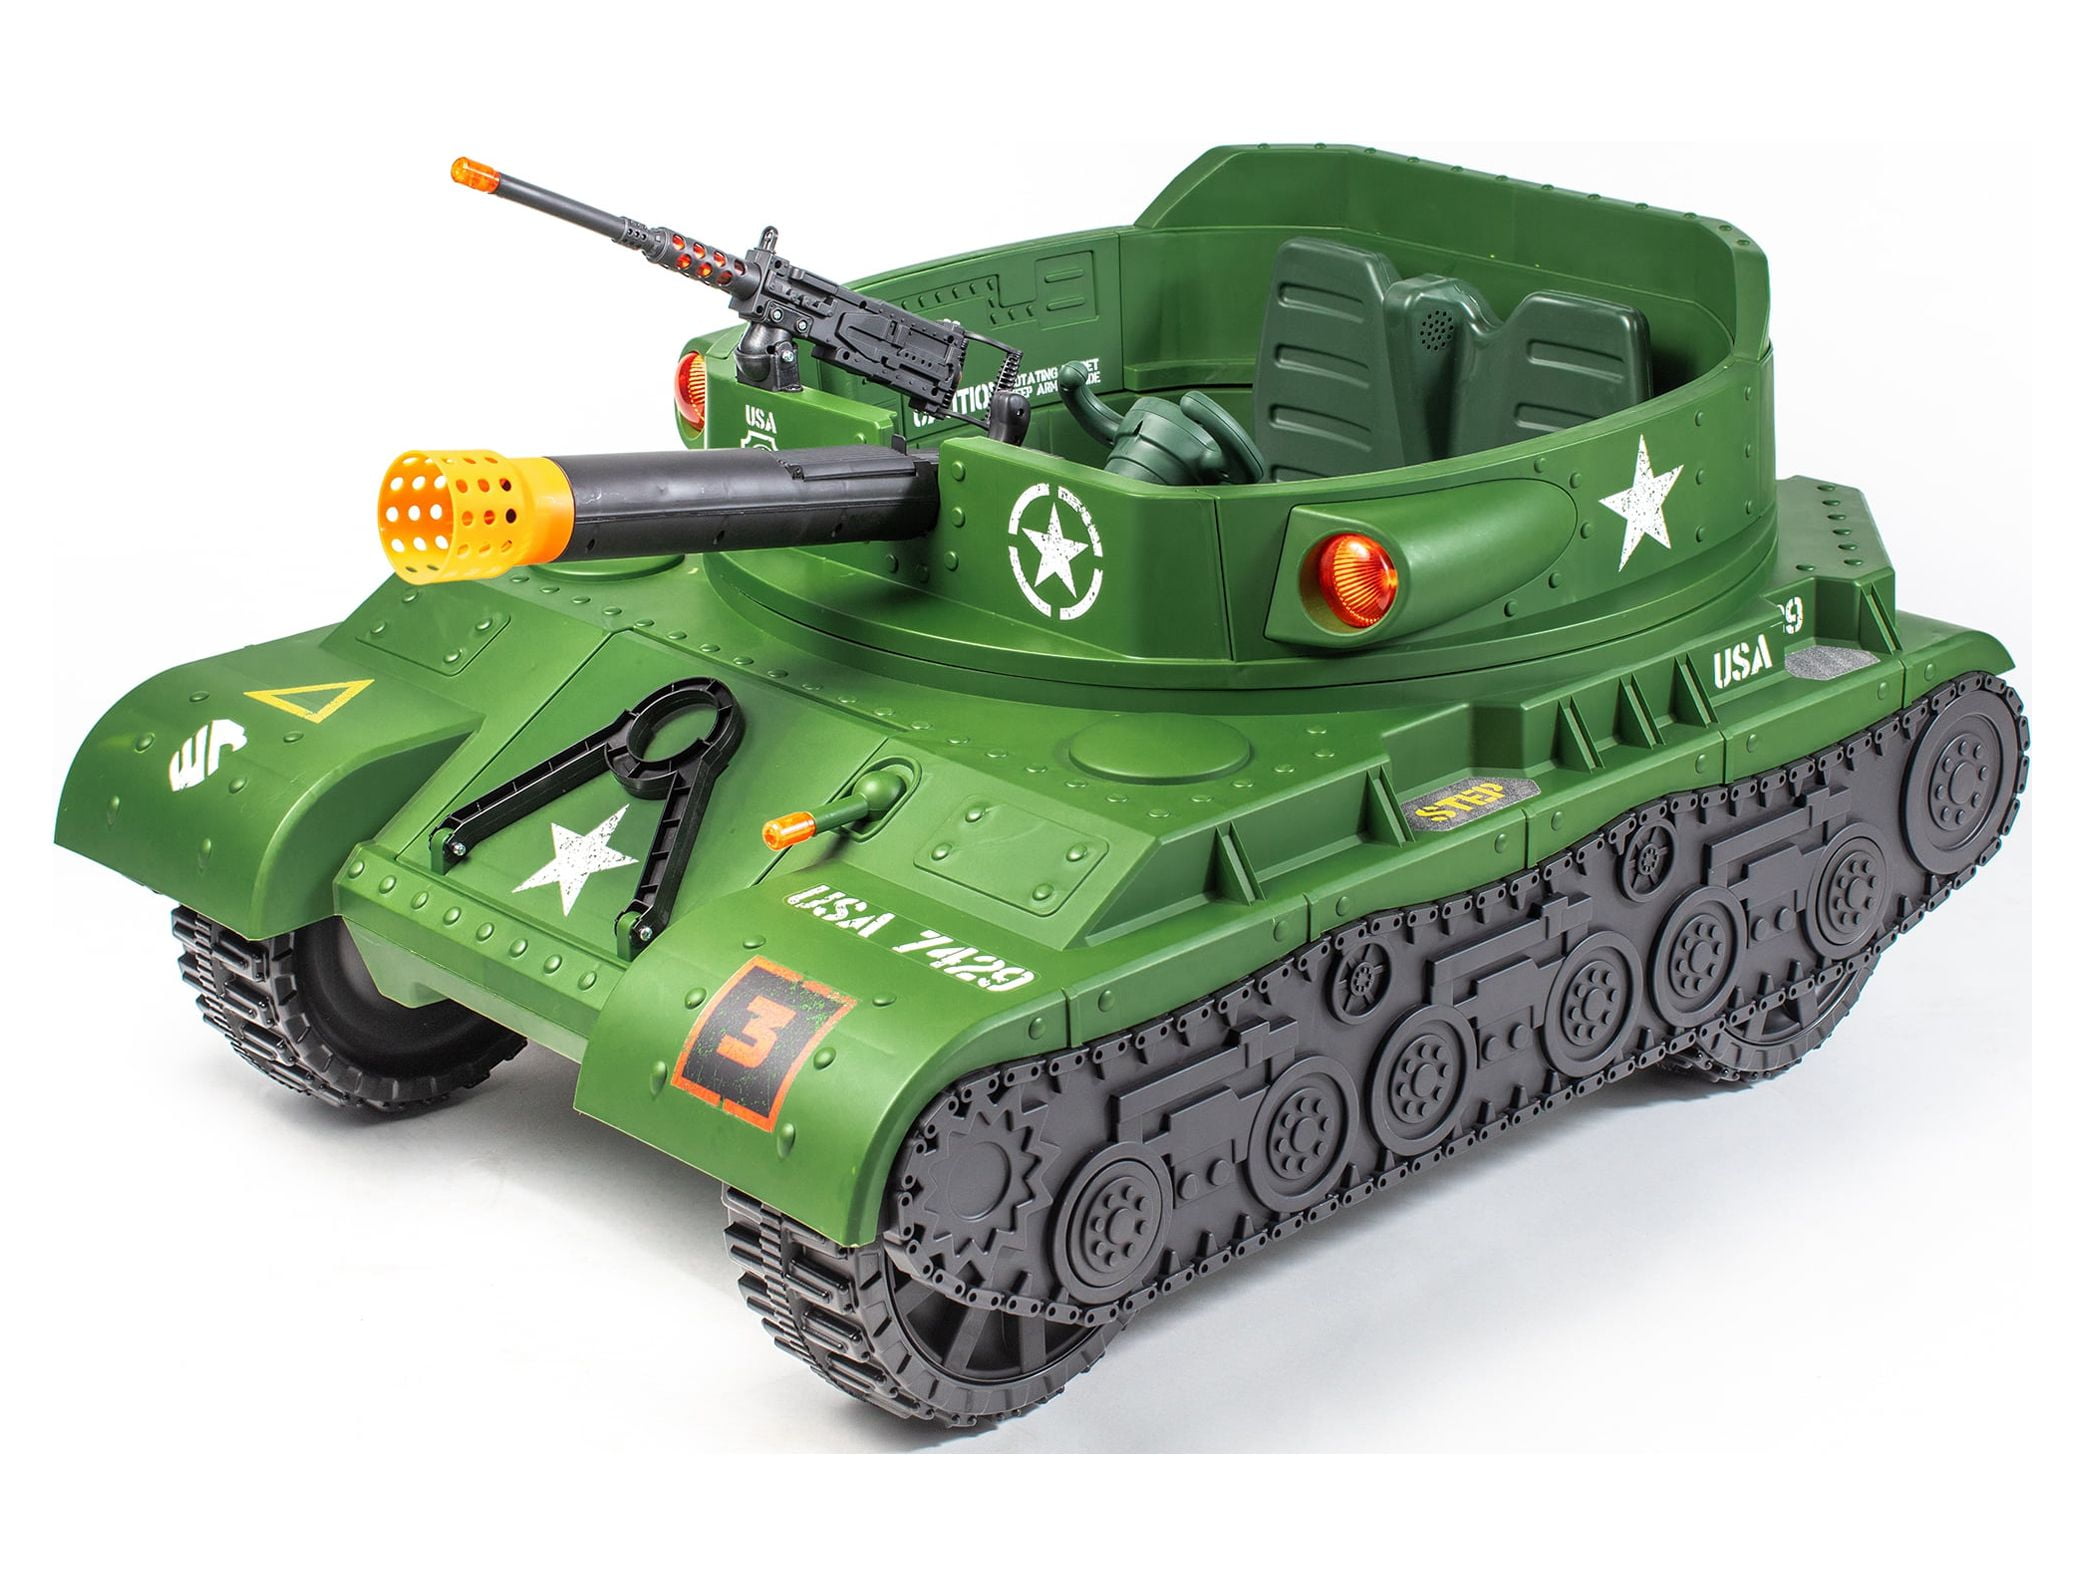 NEW WALMART EXCLUSIVE Adventure Force 24 Volt Thunder Tank TAN Ride-On With  Working Cannon and Rotating Turret! For Boys & Girls Ages 3 and up 